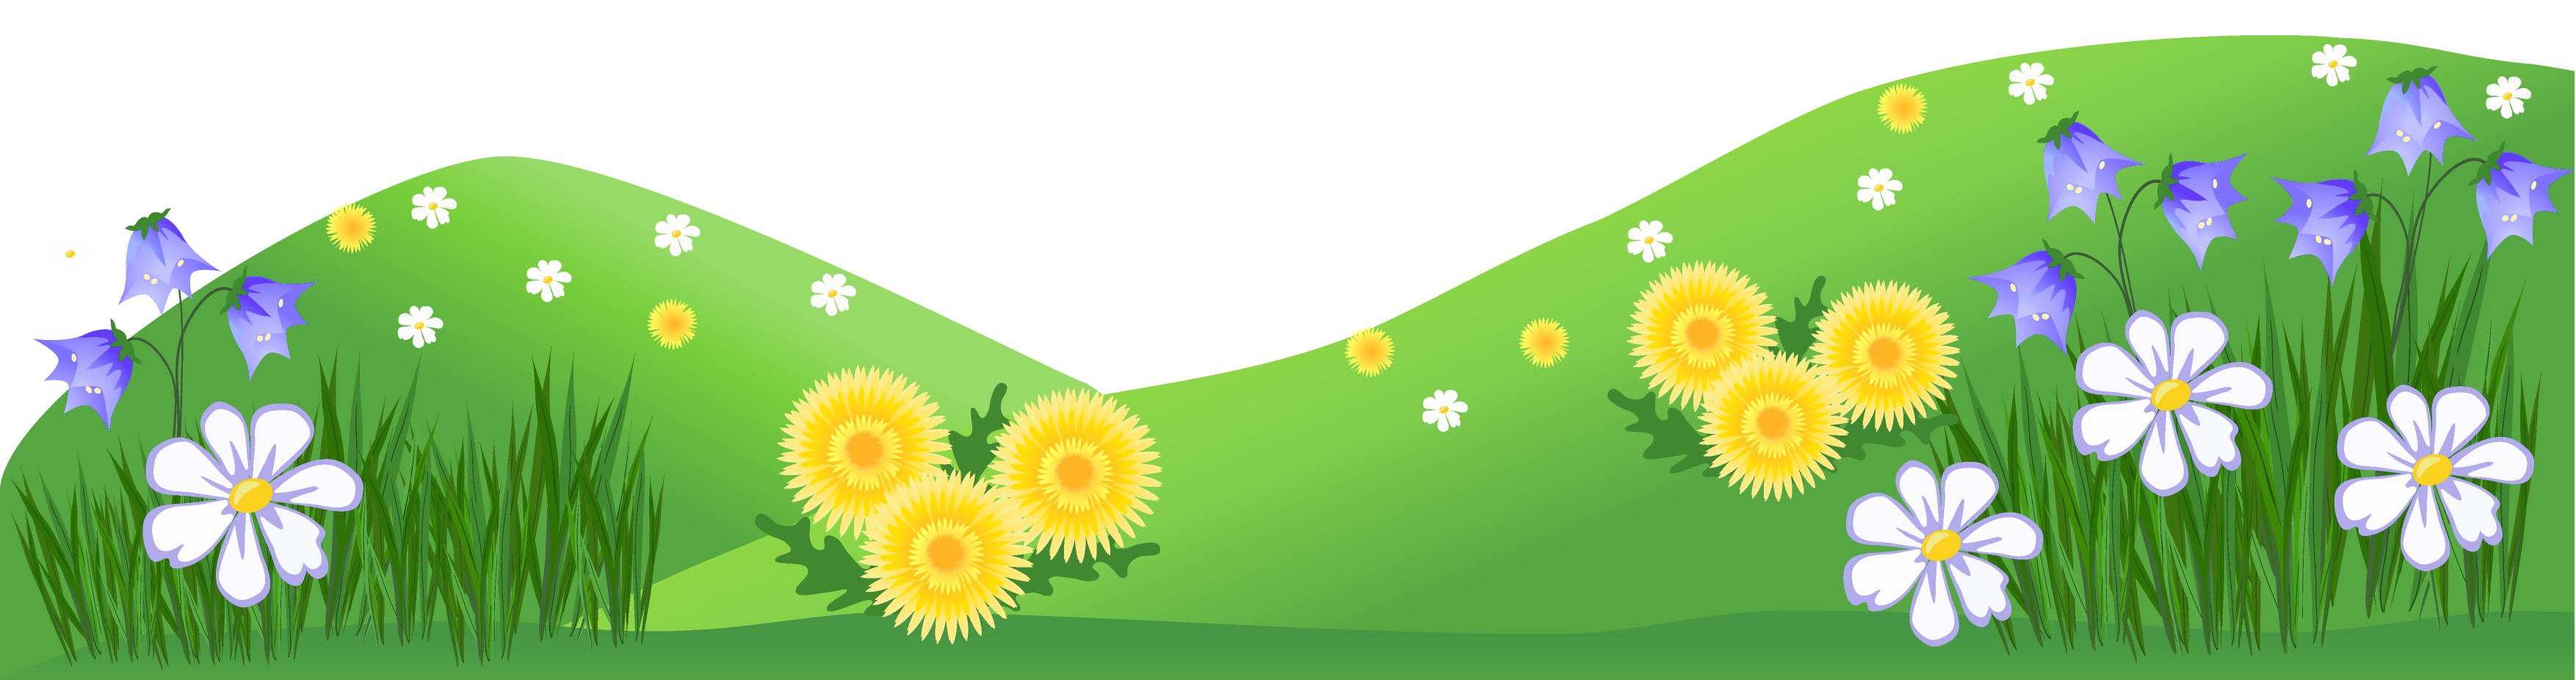 Grass Ground With Flowers Download Png Clipart